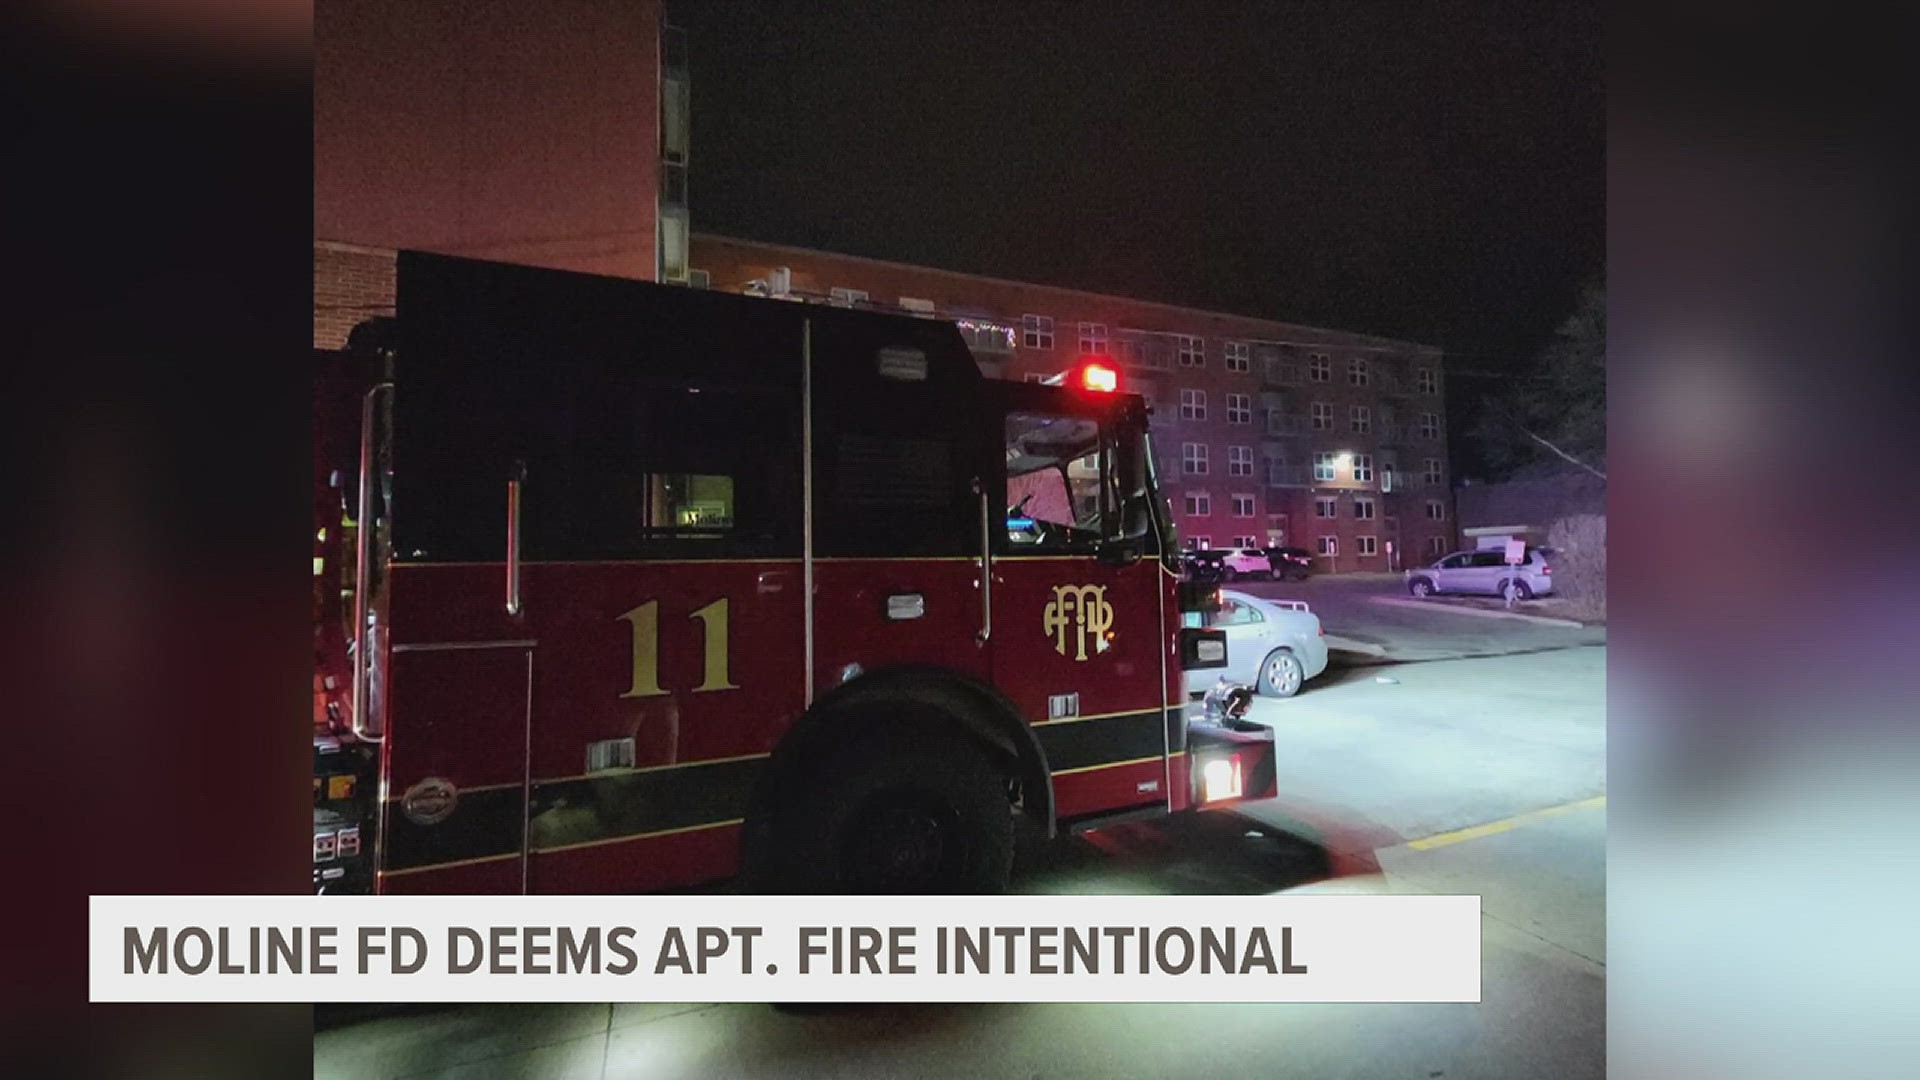 A Wednesday night fire at Moline Enterprise Lofts was found to be intentional, officials say. A suspect was arrested.